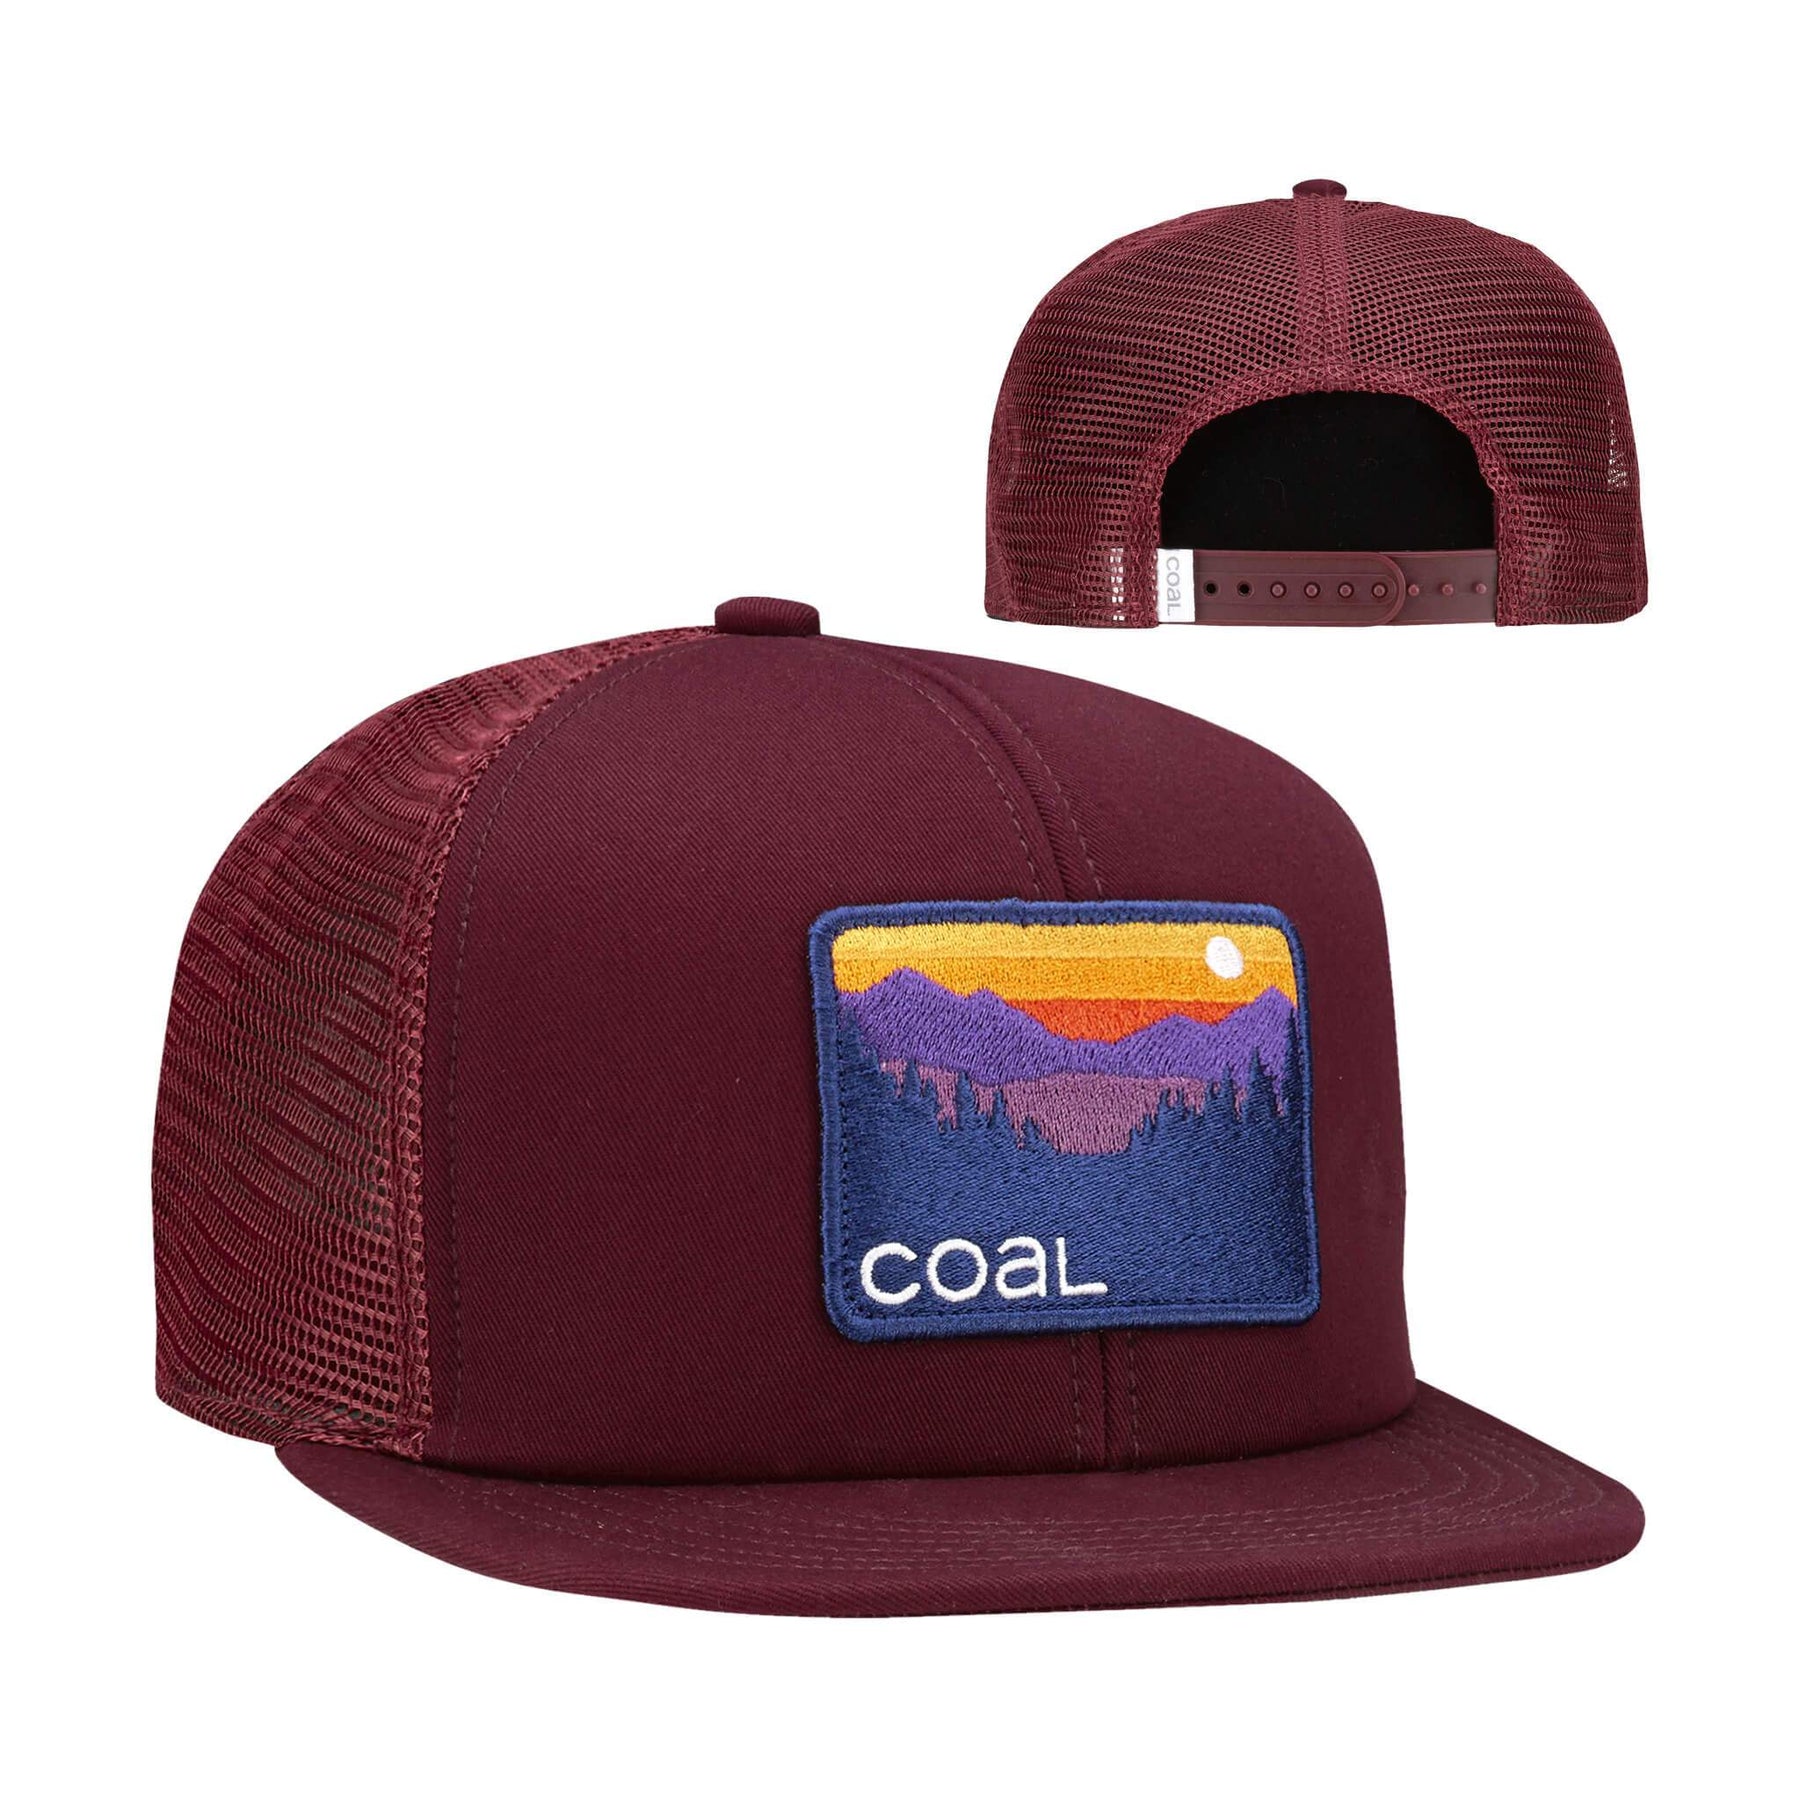 Coal Caps and beanies new styles and colors